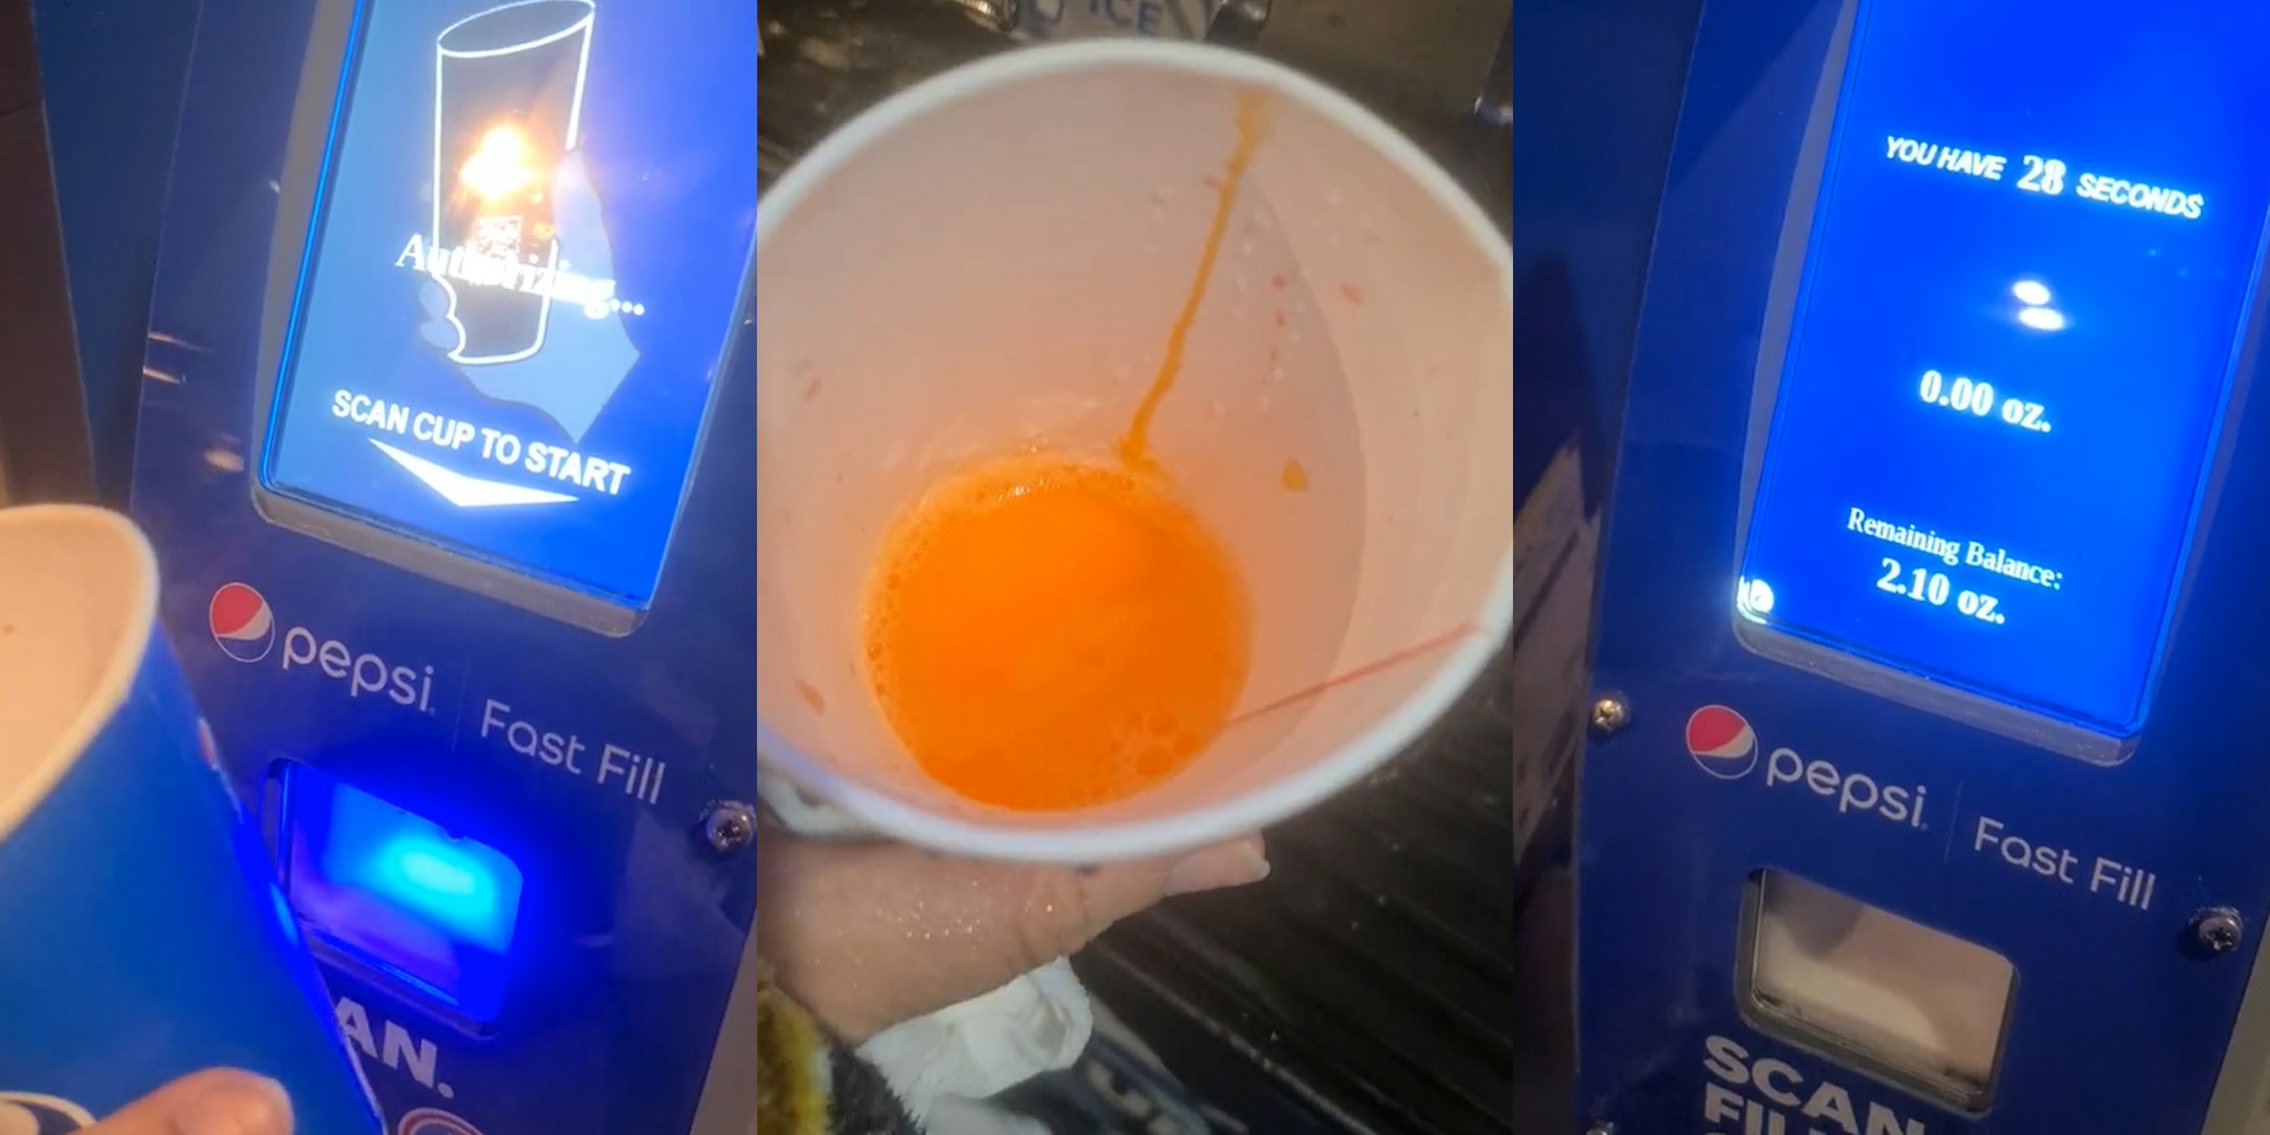 person holding Pepsi cup up to machine to scan QR code (l) cut with small amount of orange soda poured inside from soda dispenser (c) Pepsi Fast Fill machine with screen reading 'YOU HAVE 28 SECONDS' (r)